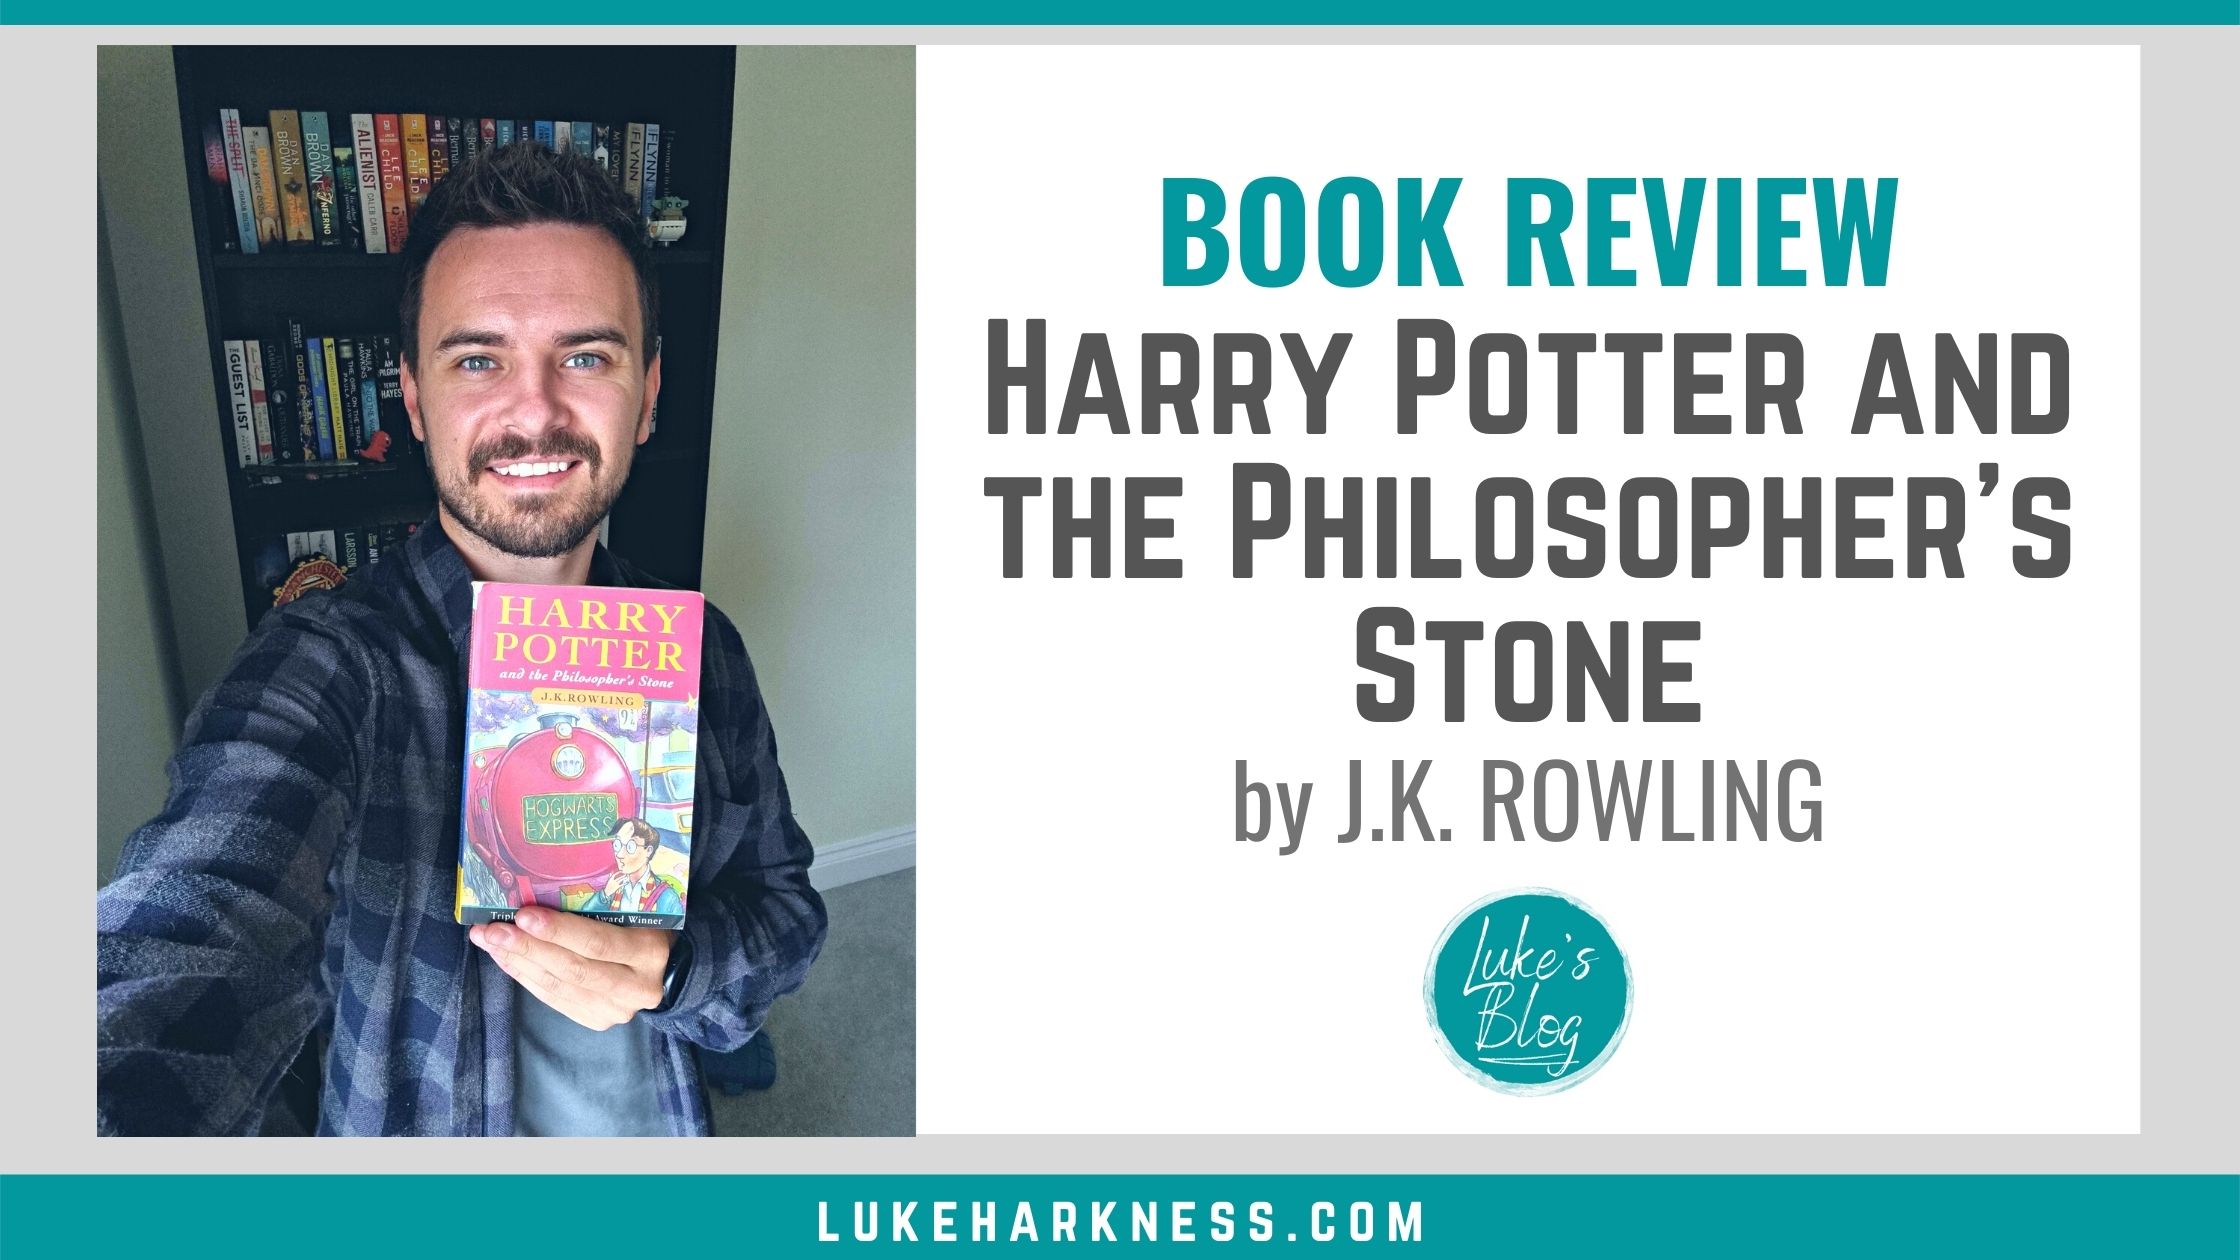 harry potter and the philosopher's stone book review for school